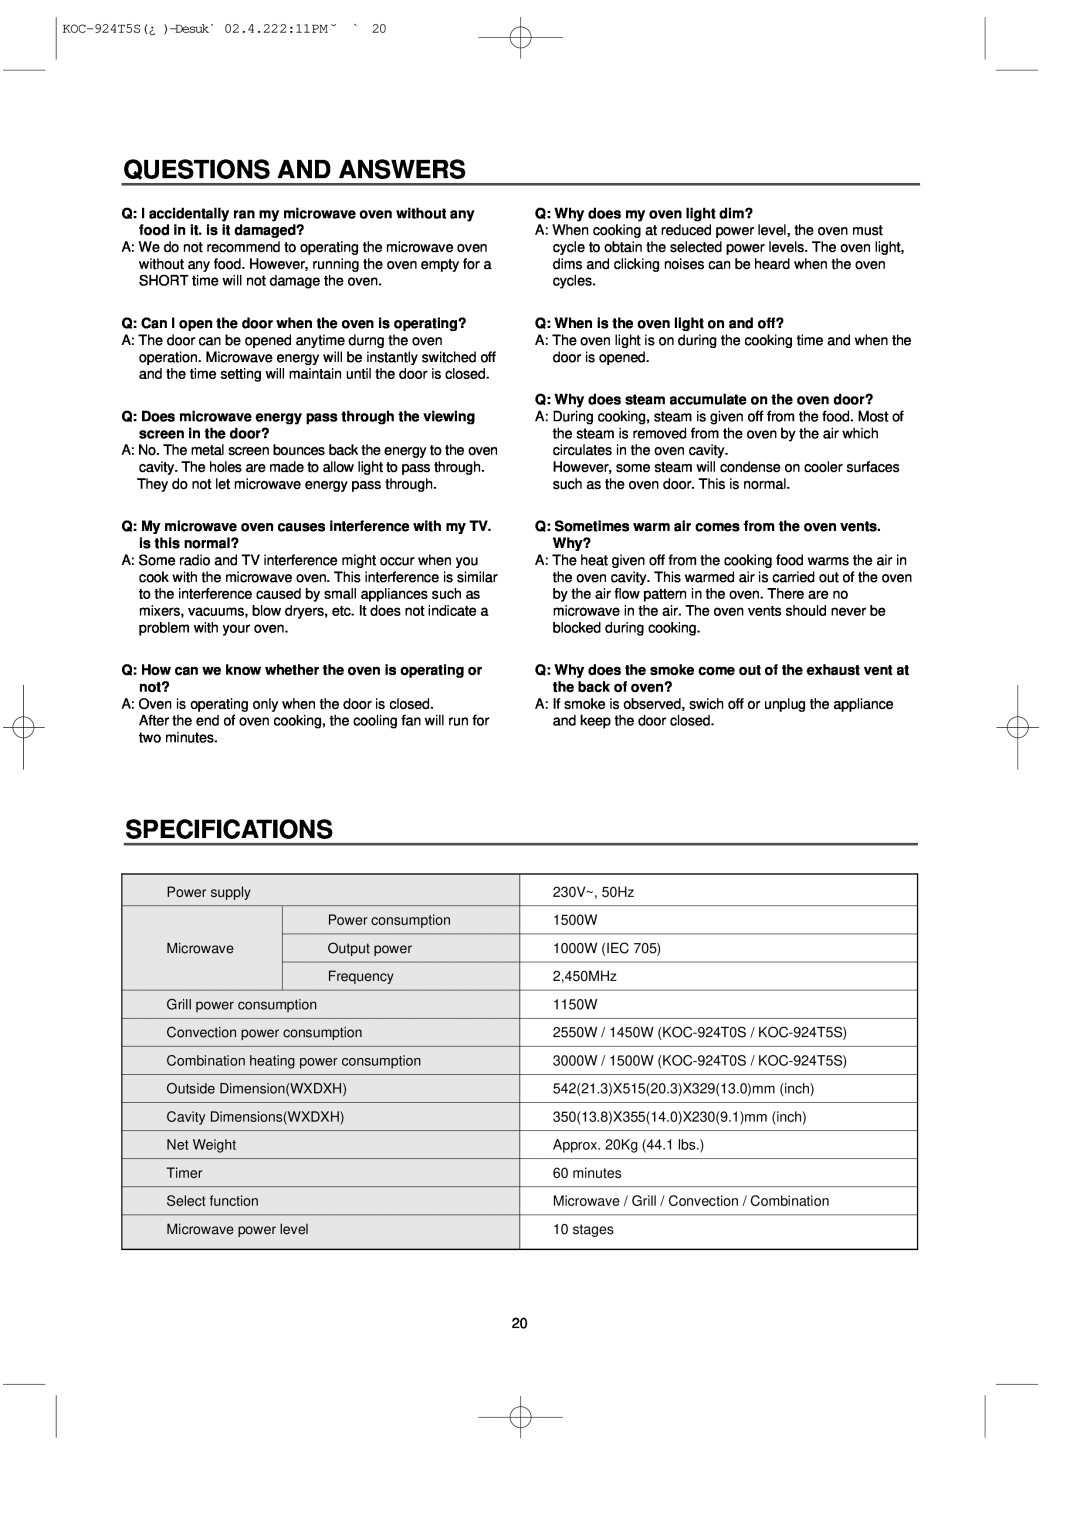 Daewoo KOC-924T owner manual Questions And Answers, Specifications 